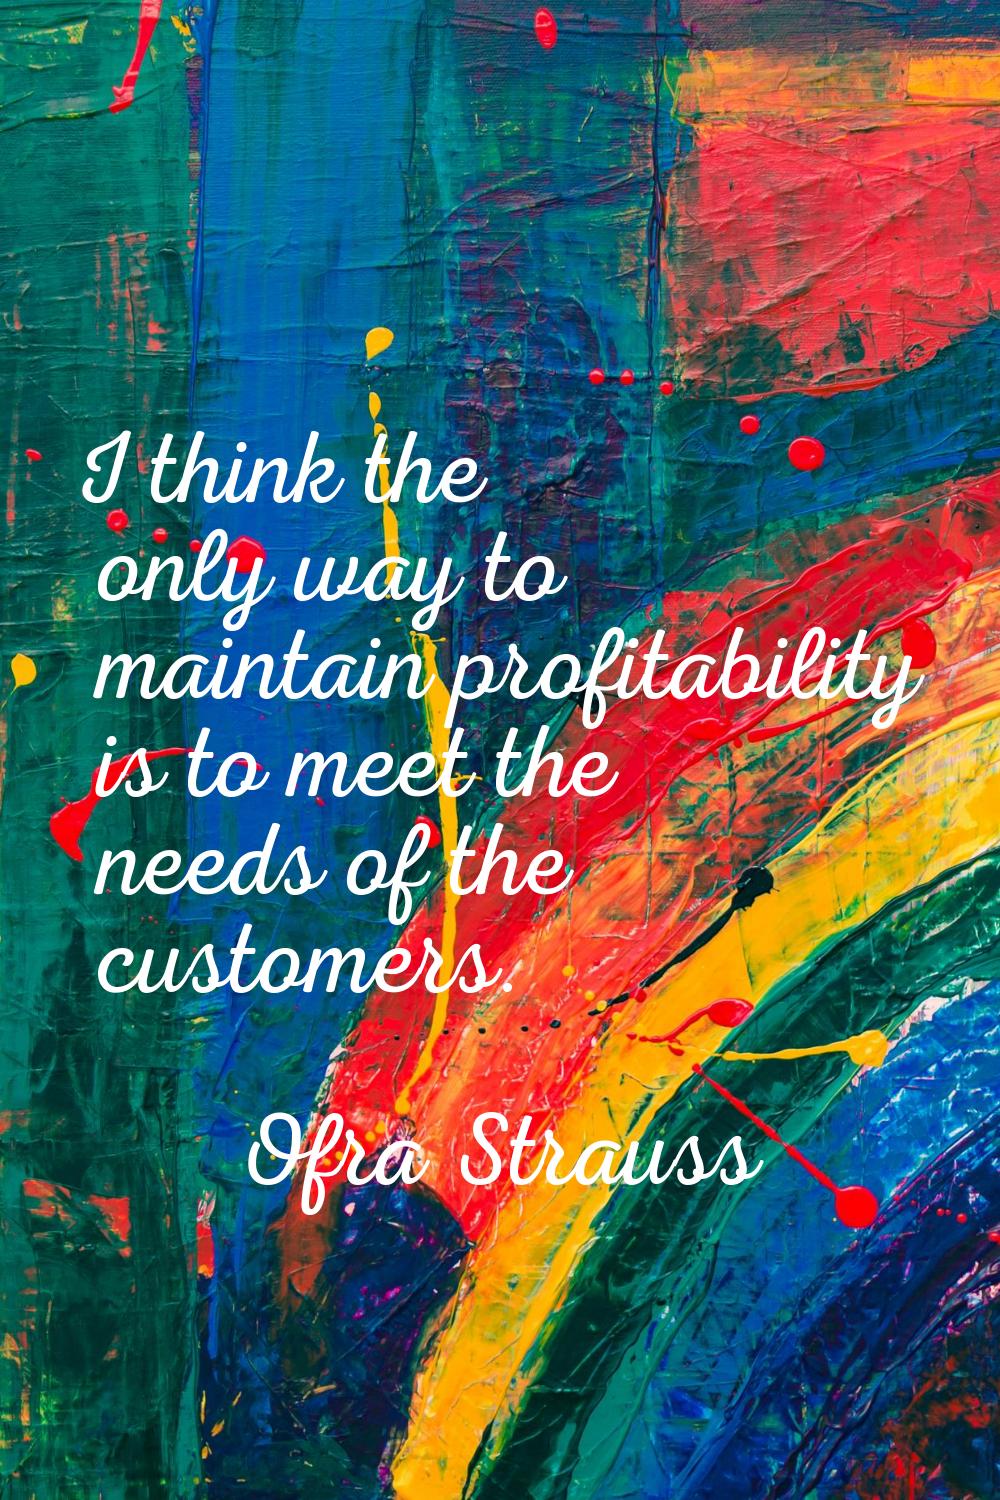 I think the only way to maintain profitability is to meet the needs of the customers.